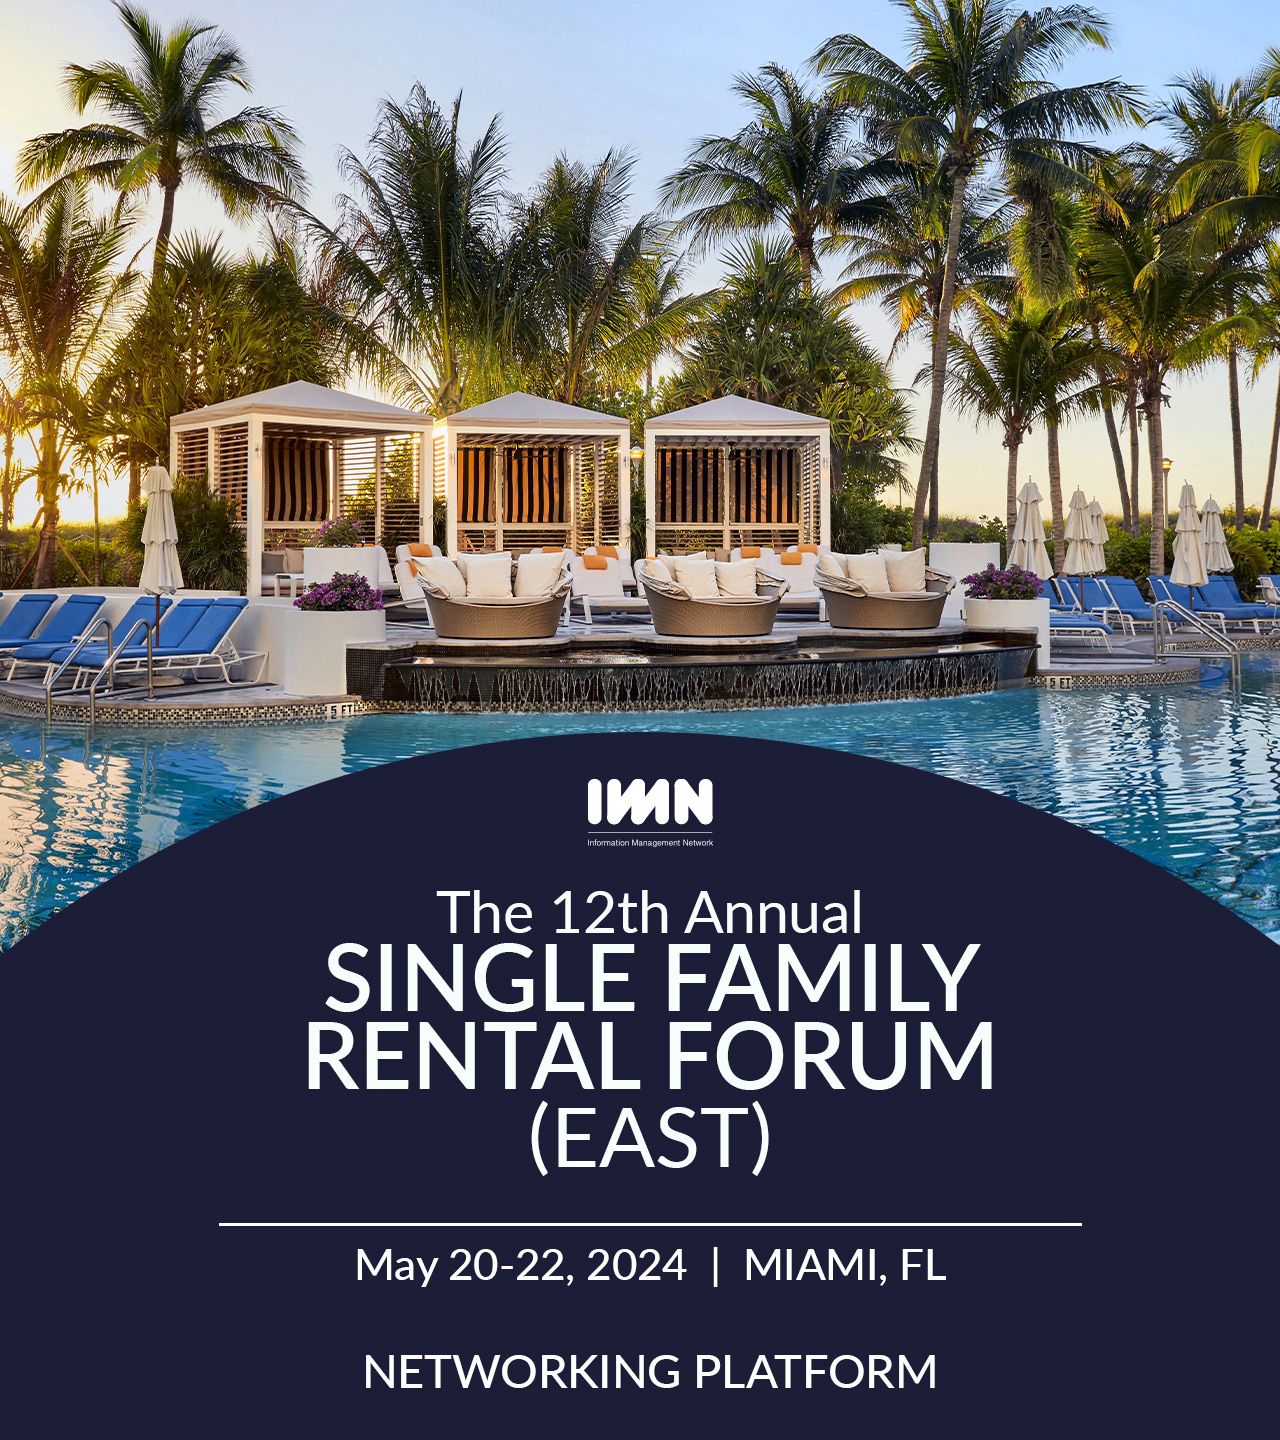 Network now for IMN's SFR East Forum